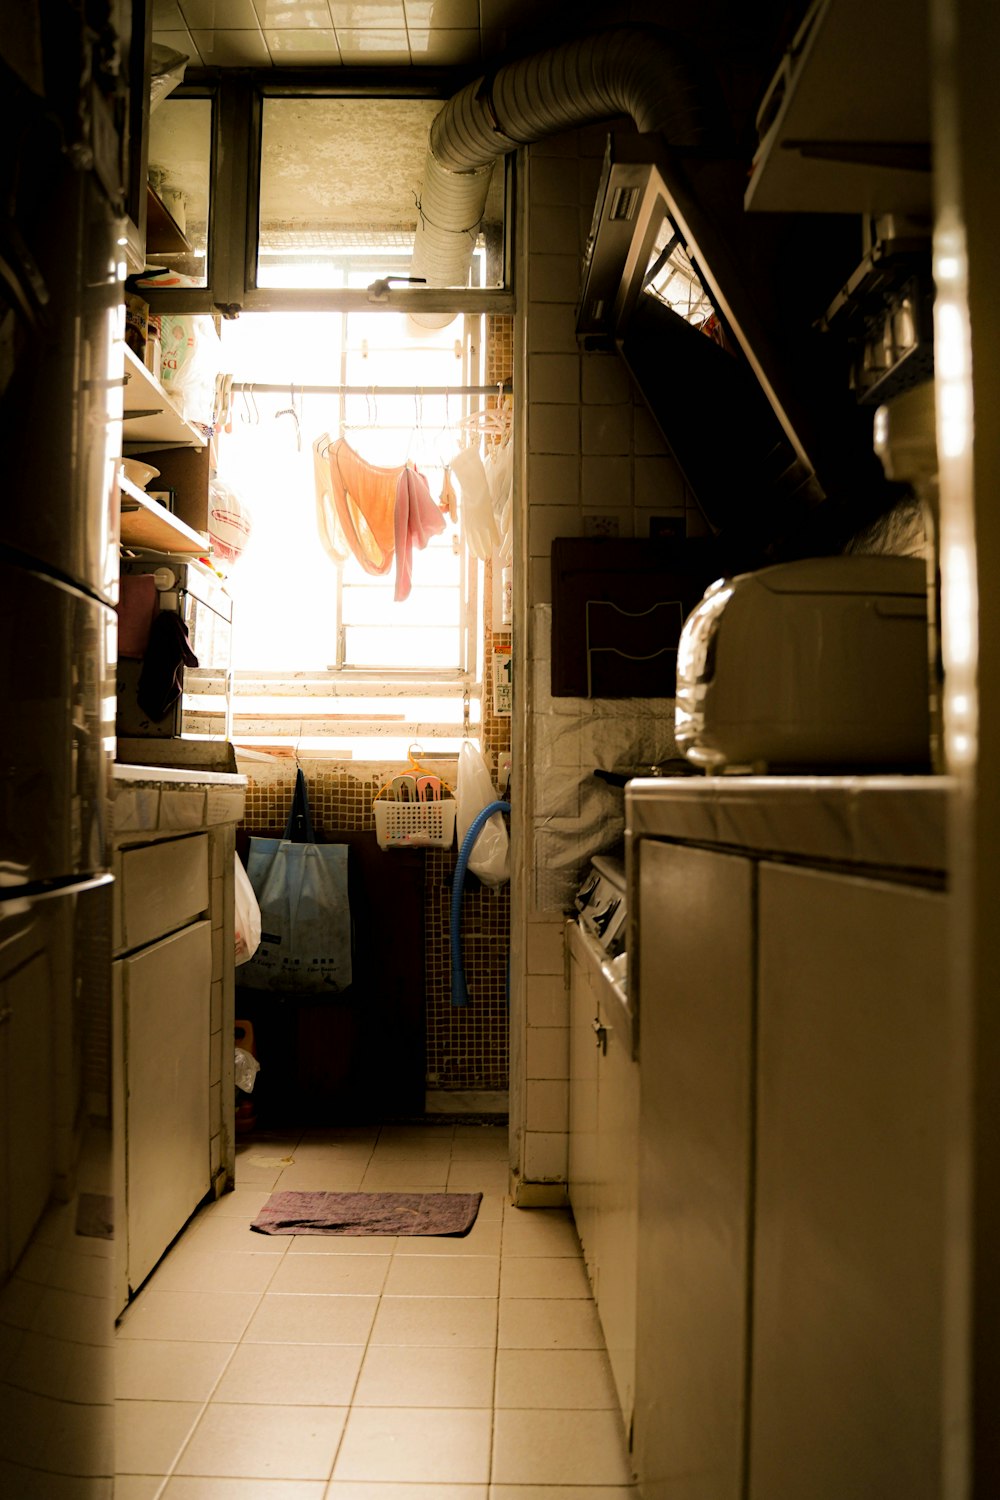 a kitchen with a stove, sink, cabinets and a window